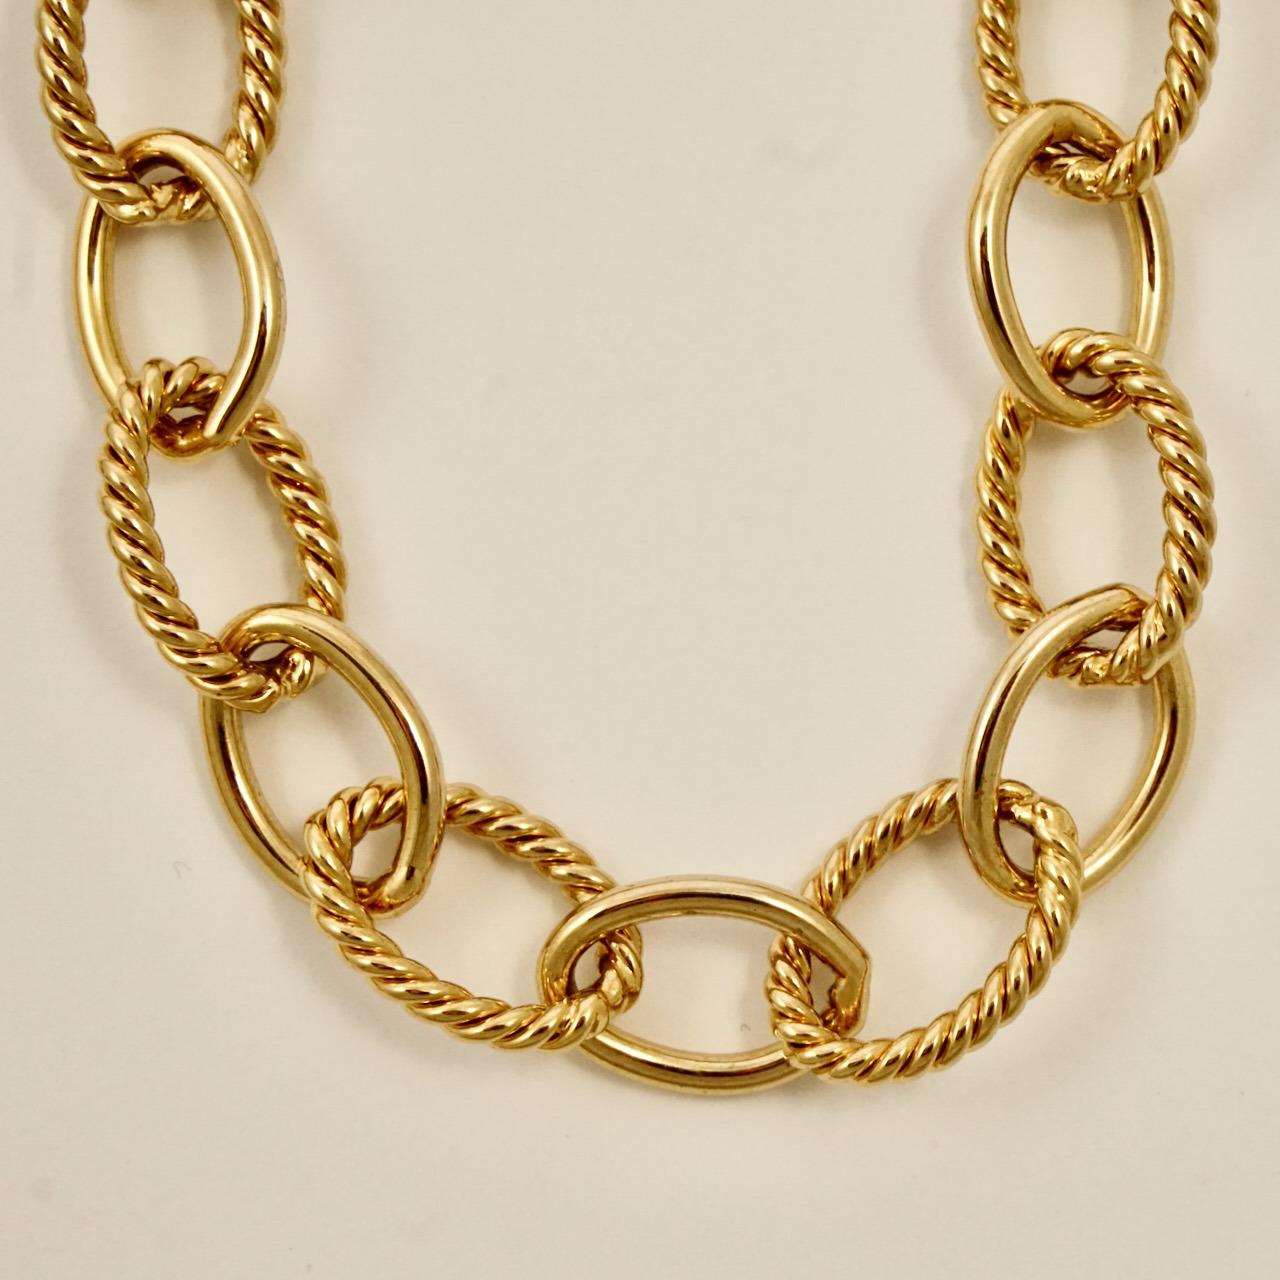 Monet 22ct triple gold plated chain necklace with rope twist and plain shiny oval links. Measuring length 86.5 cm / 34 inches, including the extension chain, by width 1 cm / .39 inch. The necklace is in very good condition.

This is a wonderful